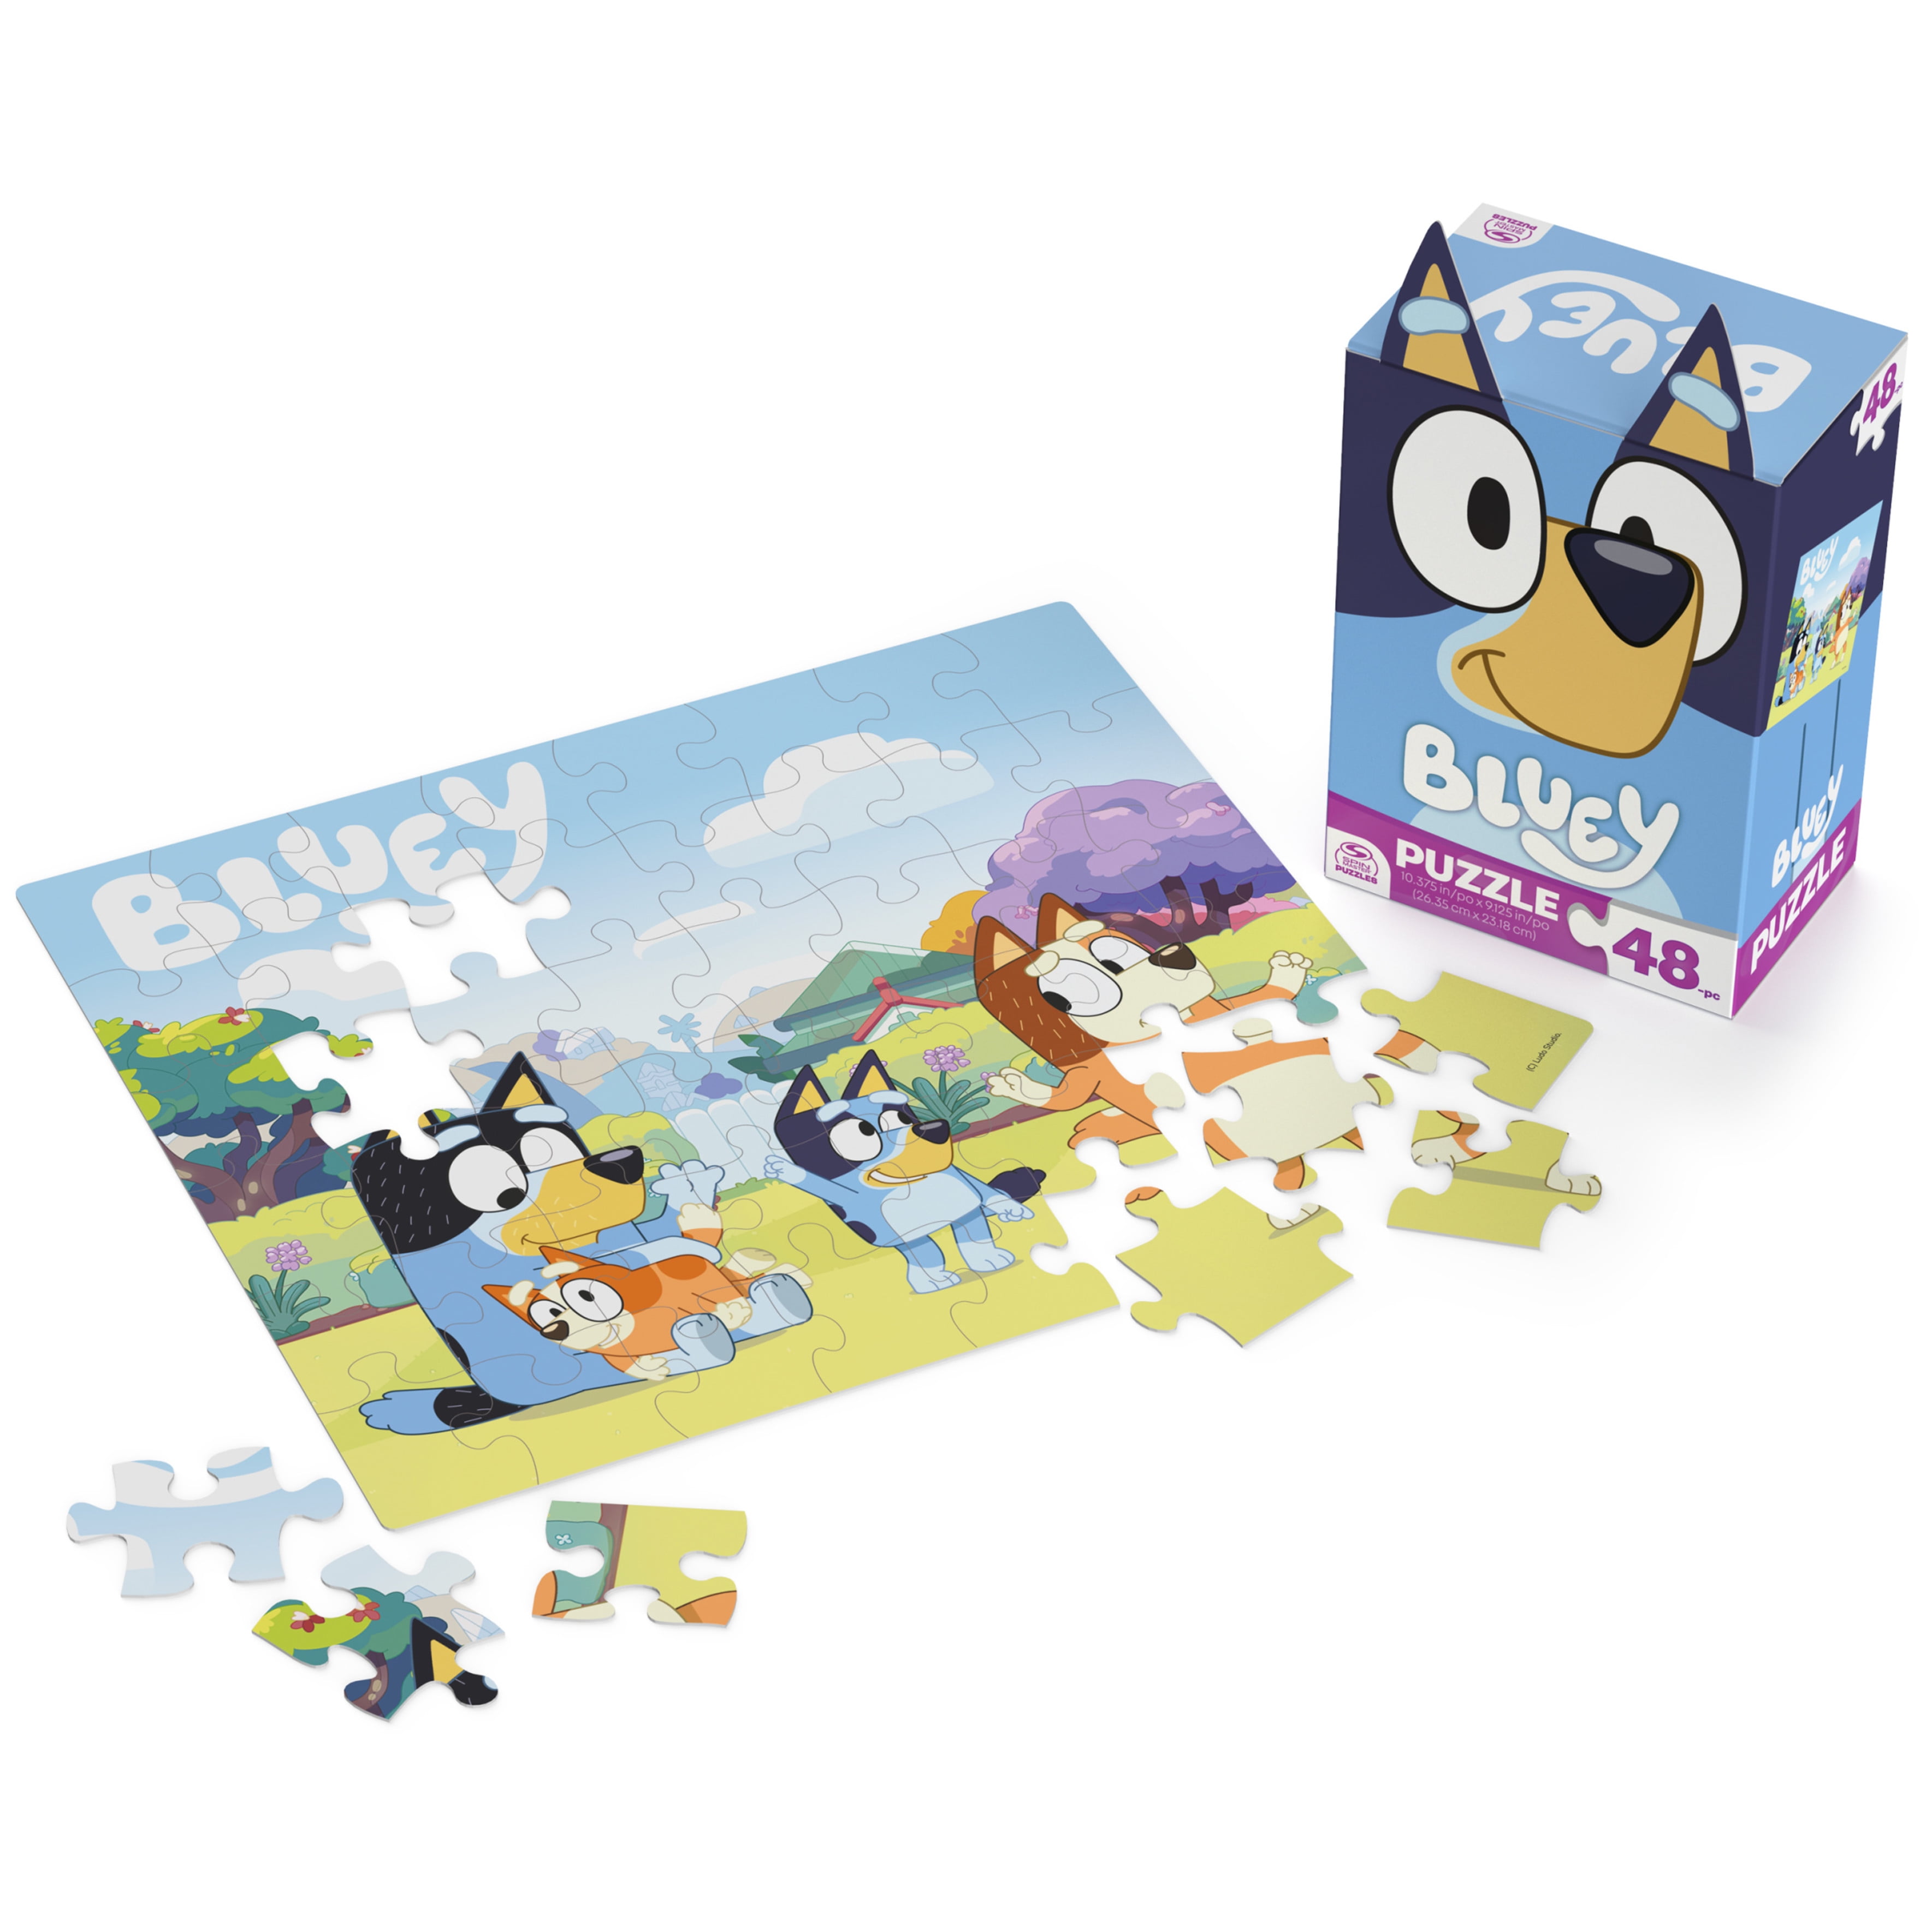 Bluey Family Puzzle - Busy Beez Toy Box